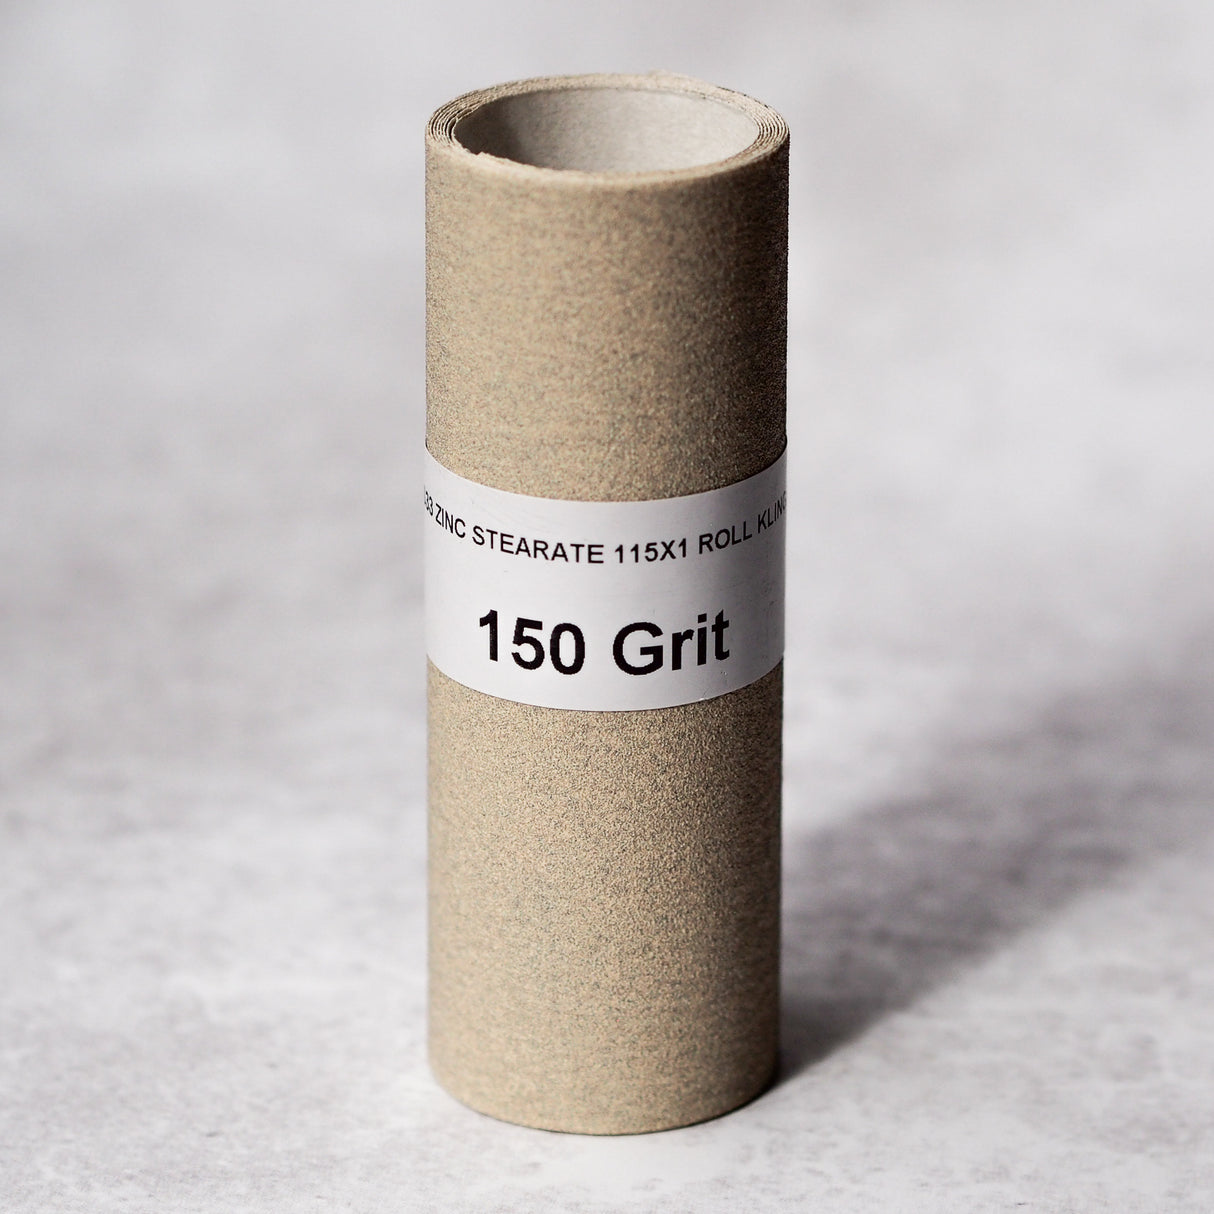 1m x 115mm Klingspor PS33 Zinc Stearate Sanding Rolls - Perfect For Decorating Applications